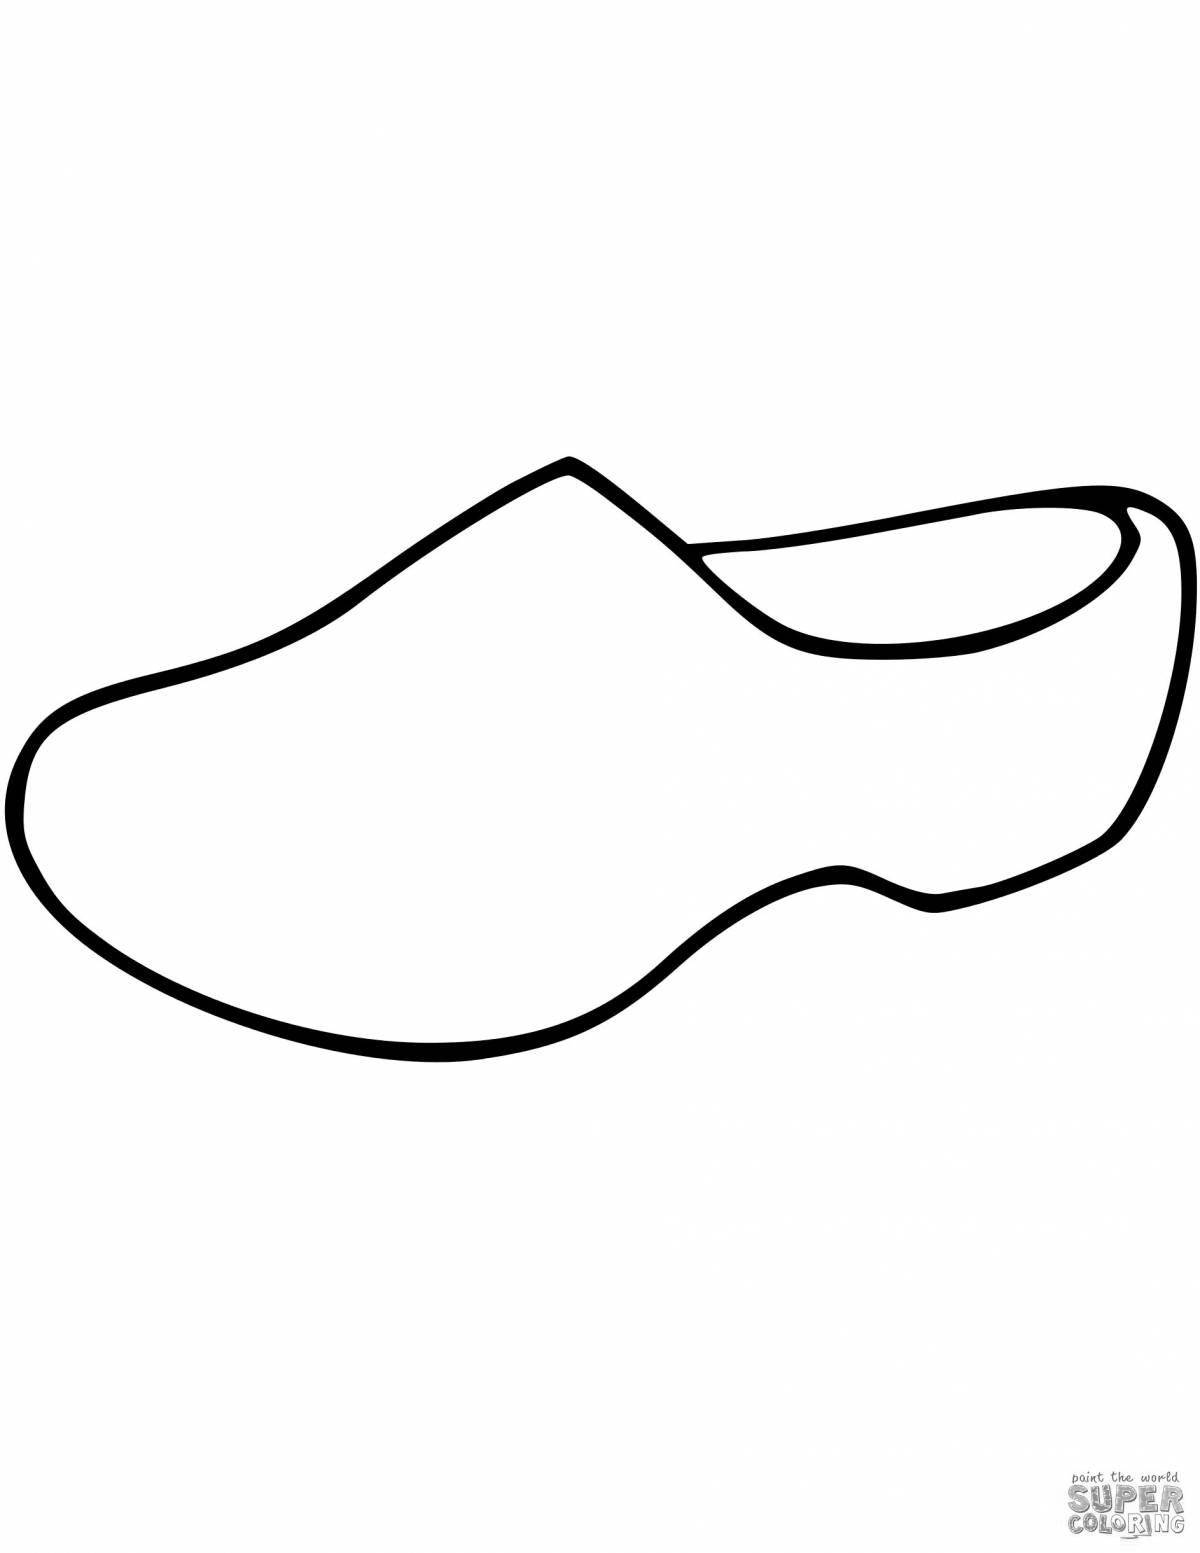 Coloring page fancy galoshes